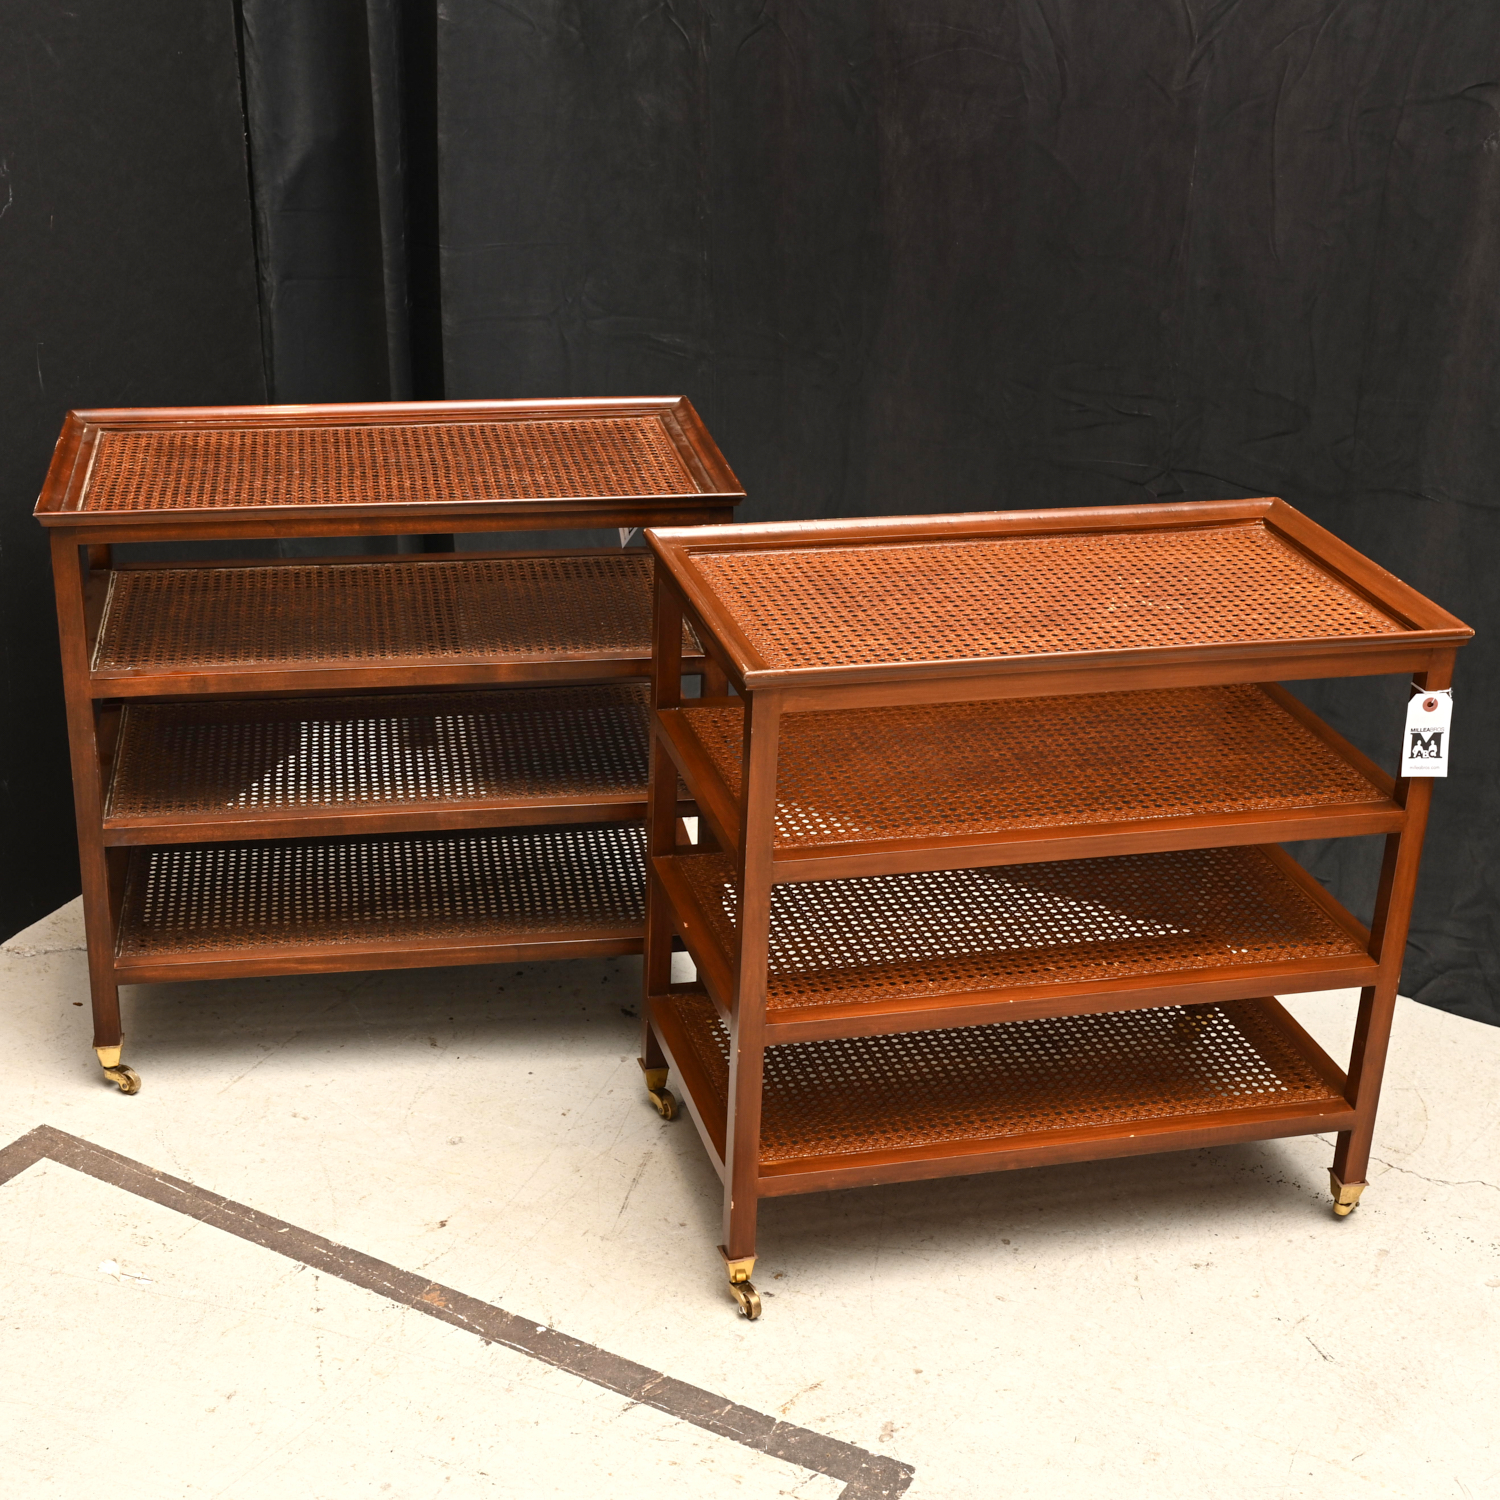 NICE PAIR CONTEMPORARY CANED ETAGERE 2ce01d